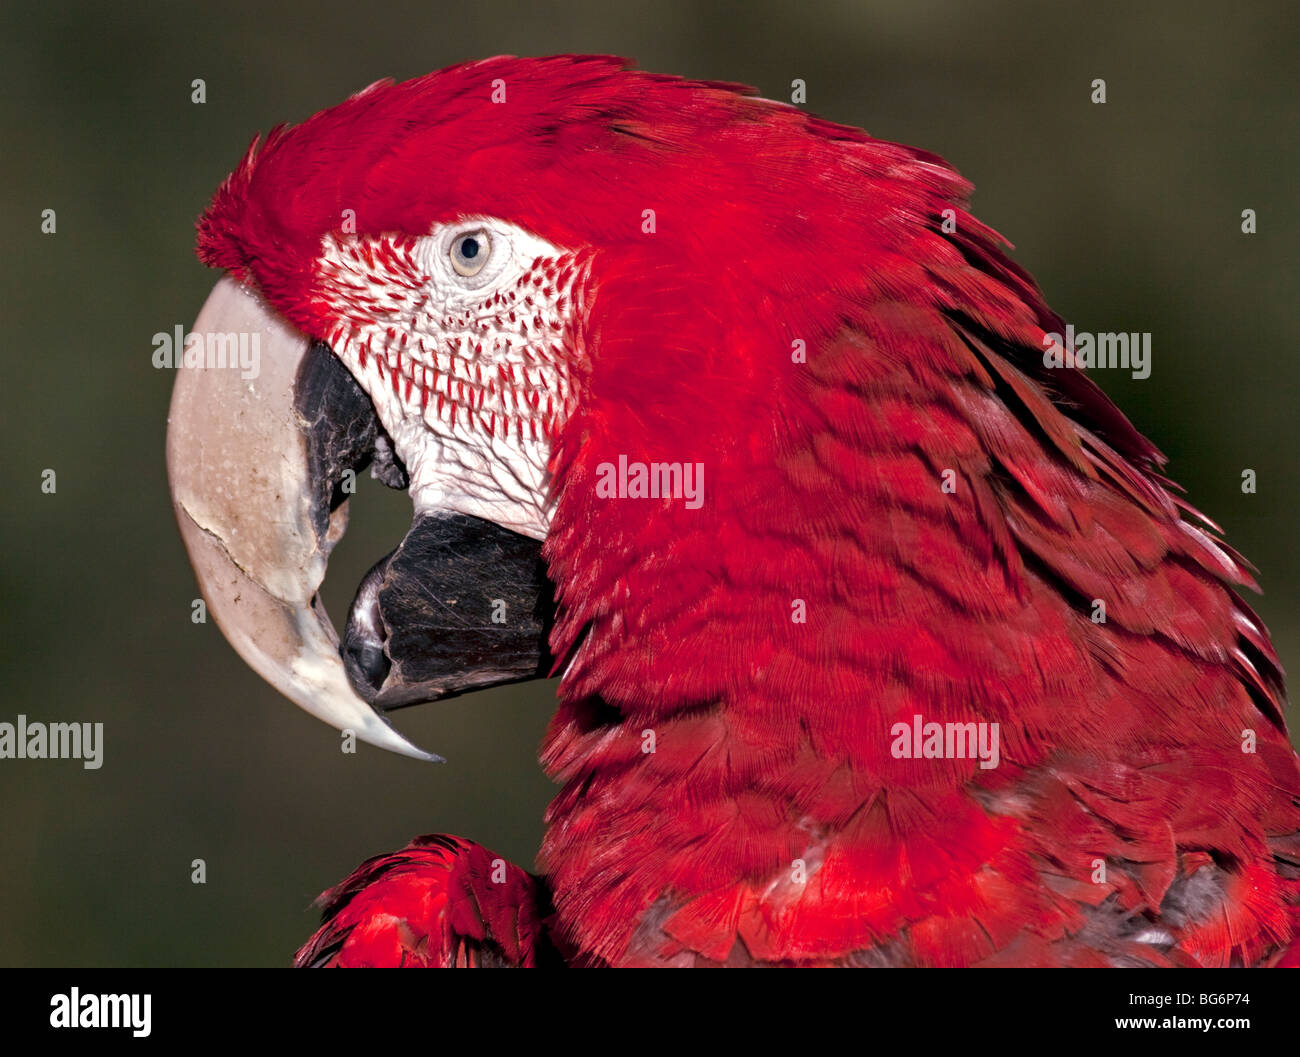 Green Winged Macaw / Red and Green Macaw (ara chloropterus) Stock Photo